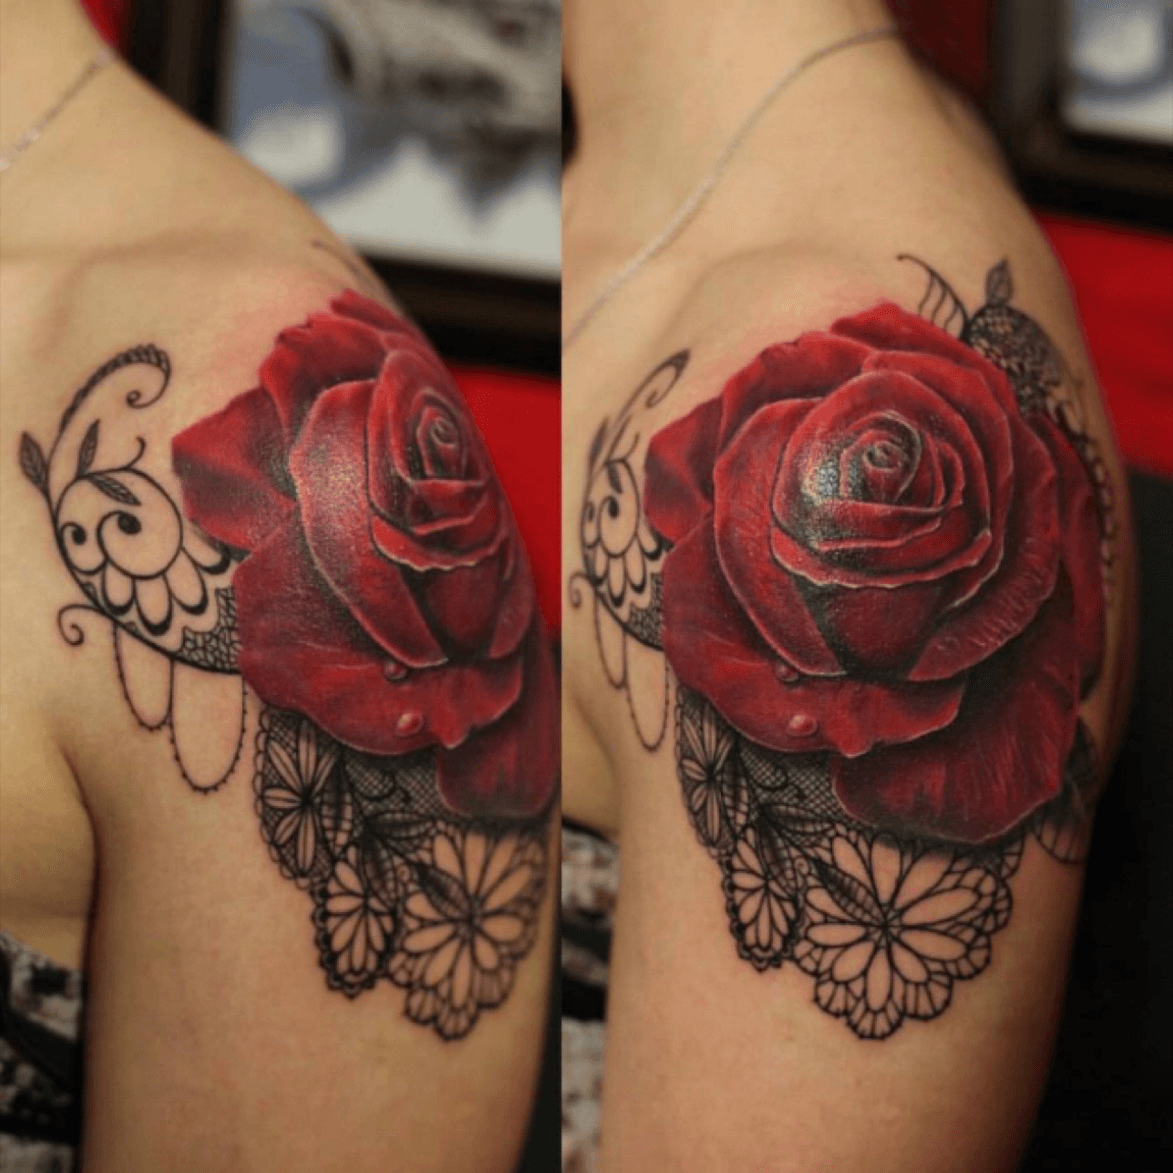 Roses and lace tattoo by gregoriokun on DeviantArt